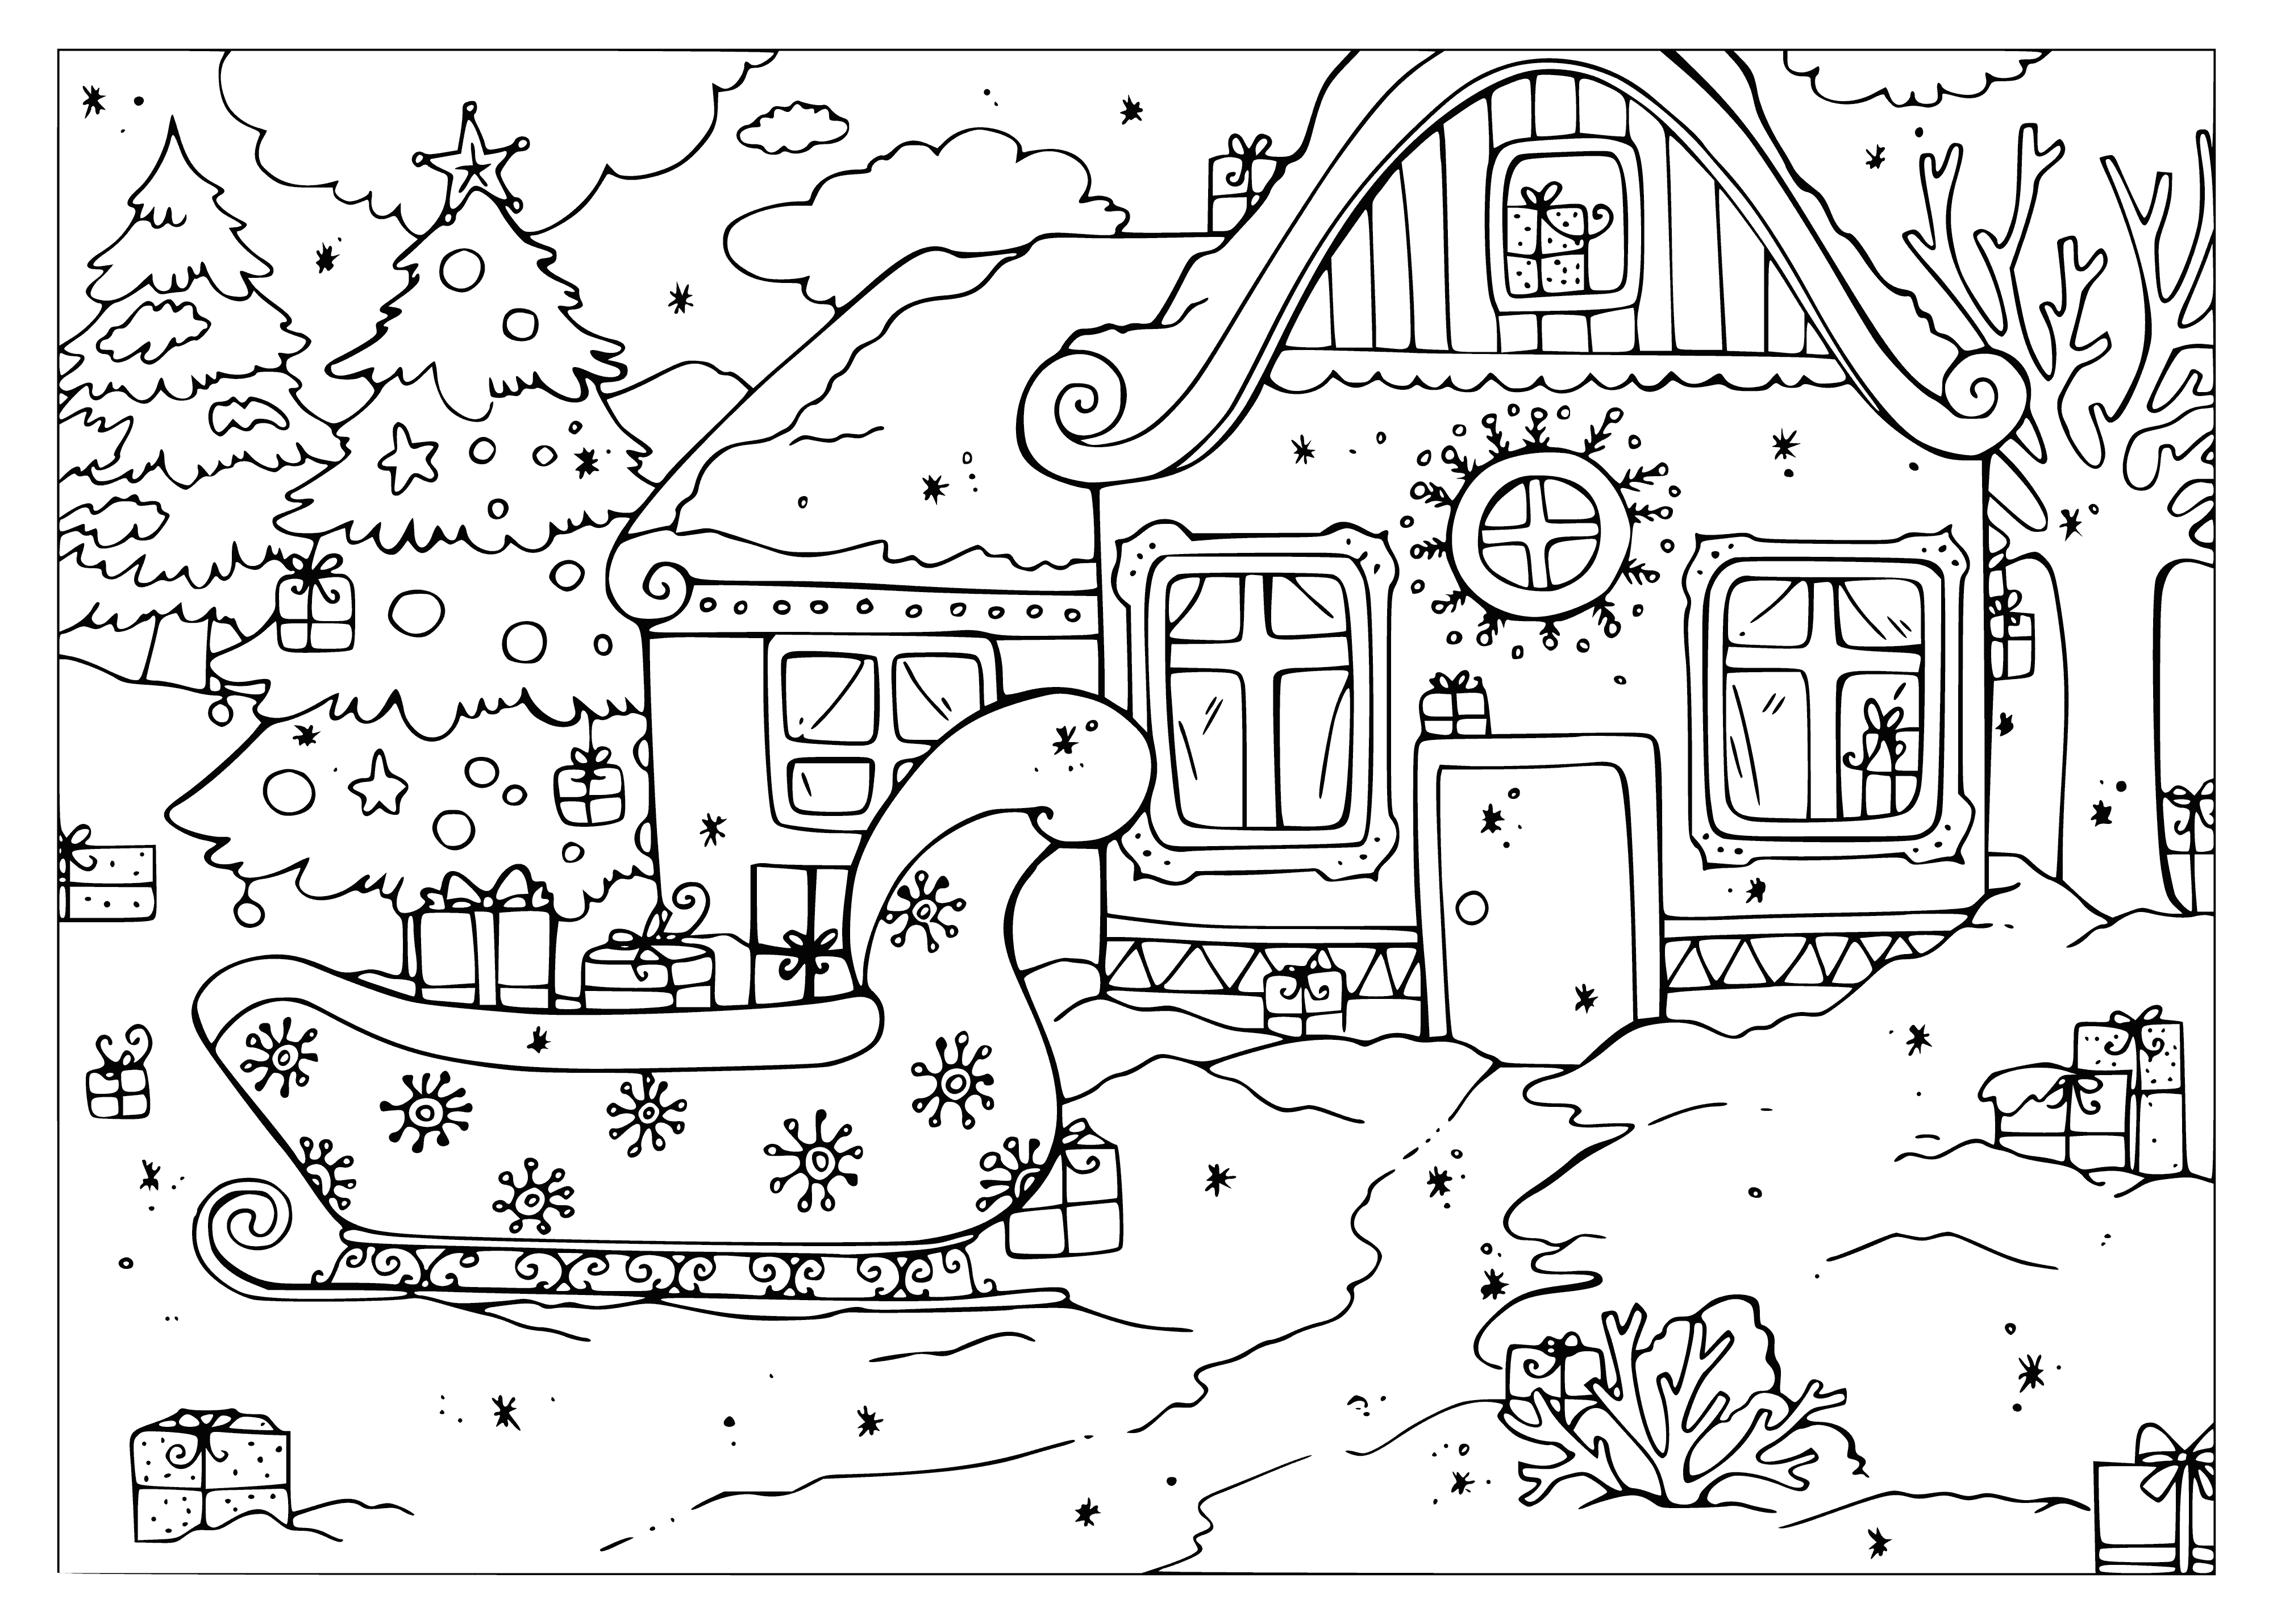 coloring page: Santa Clause is leaving his hut with a sack of presents. Snow is falling, and a tree and presents are in front of the hut. He has whiskers, a red coat and hat.